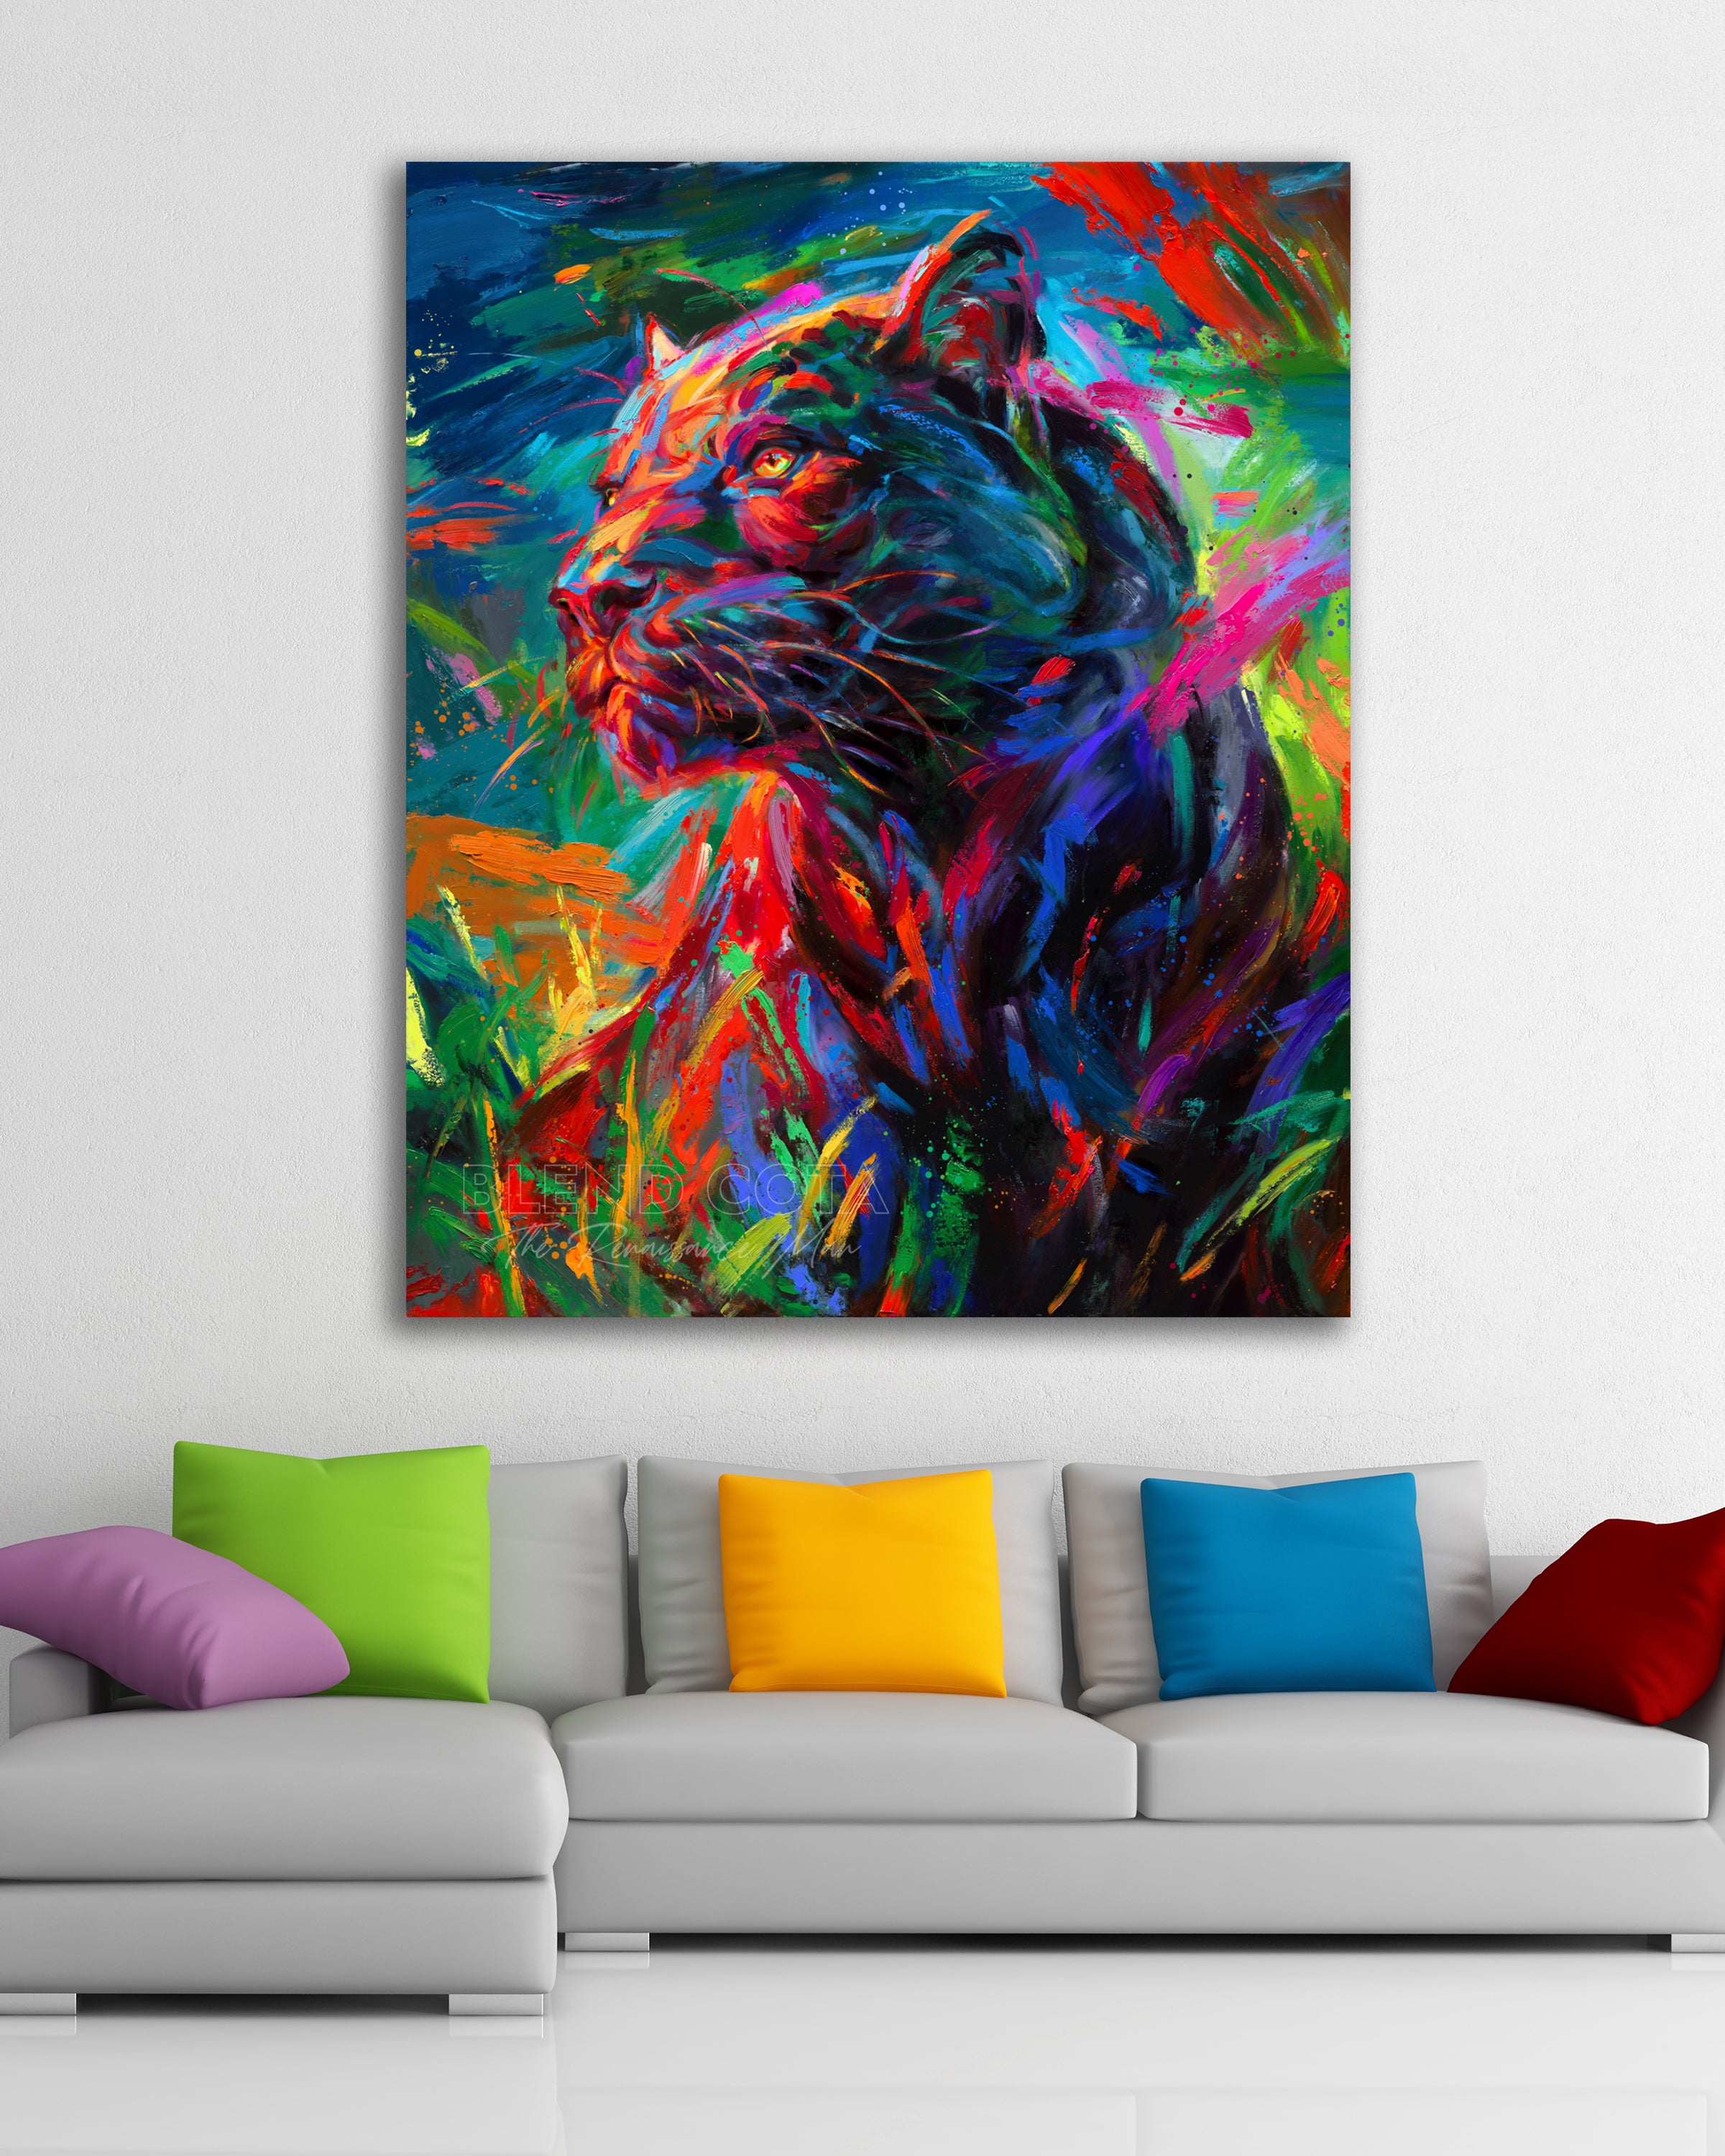 Framed original oil painting on canvas of the black panther stalking its prey through the long night painted with colorful brushstrokes in an expressionistic style in a room setting.